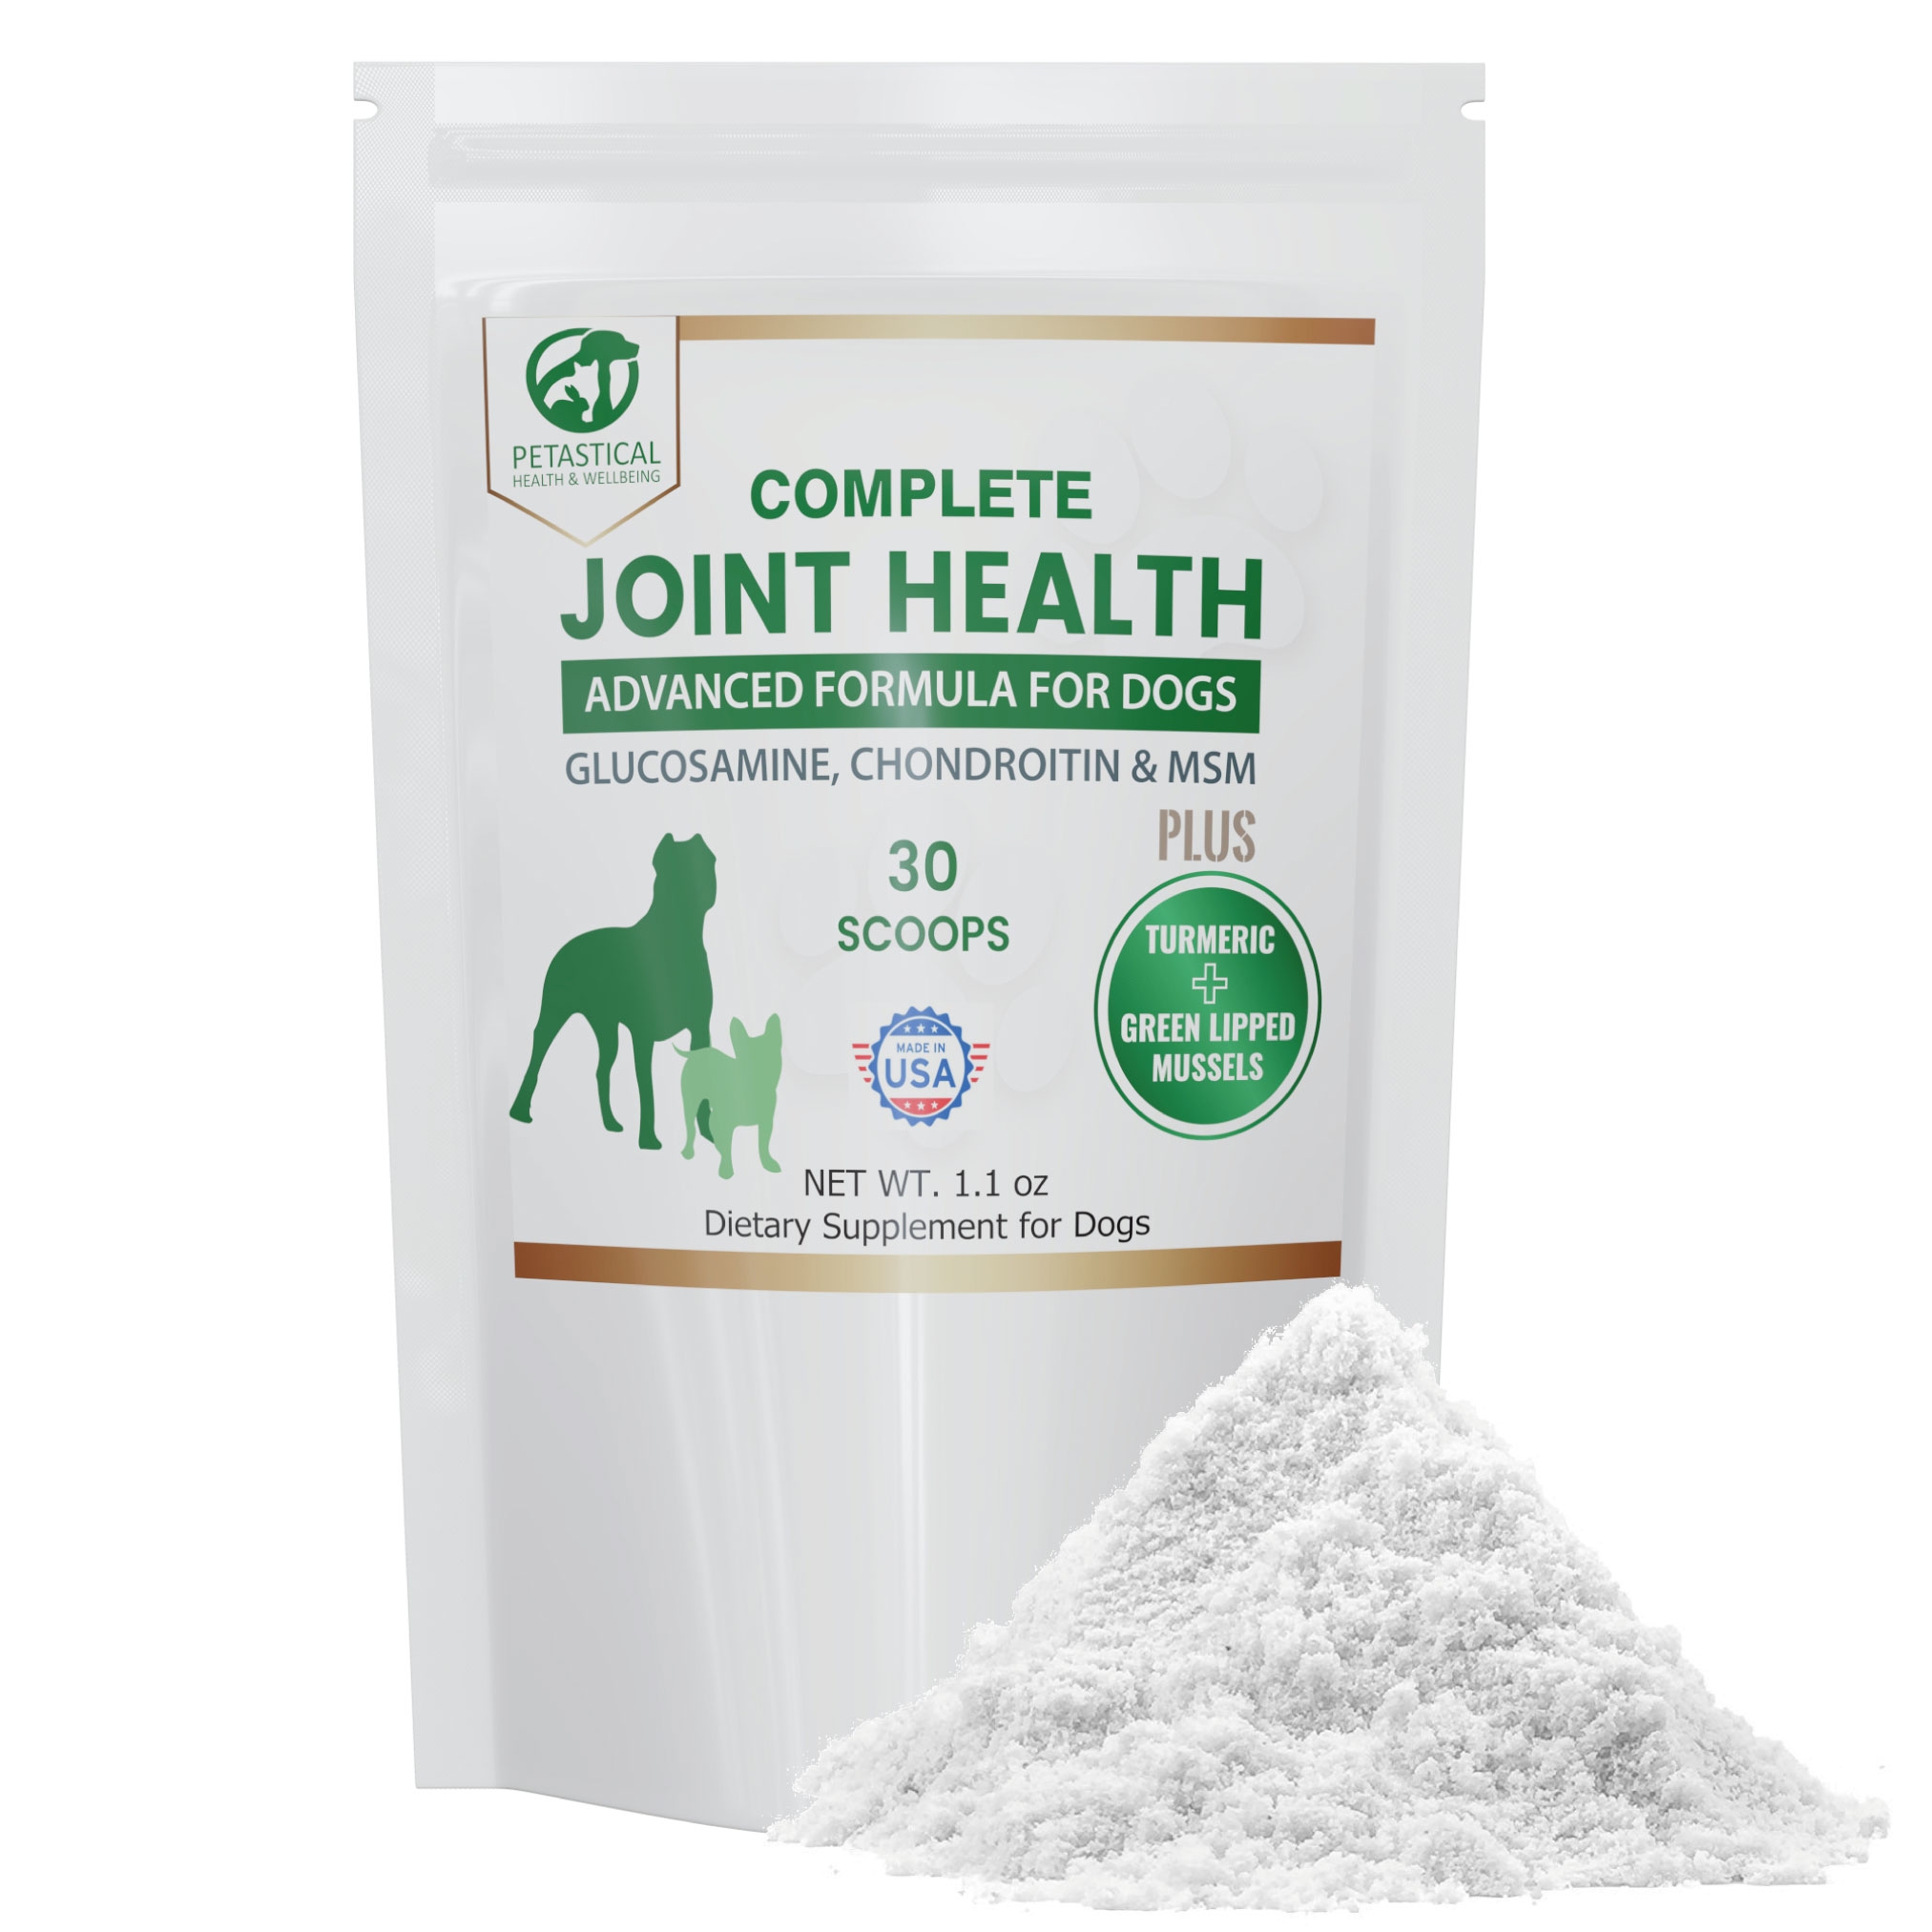 Petastical Hip and Joint Powder Supplement for Dogs (30 Scoops)